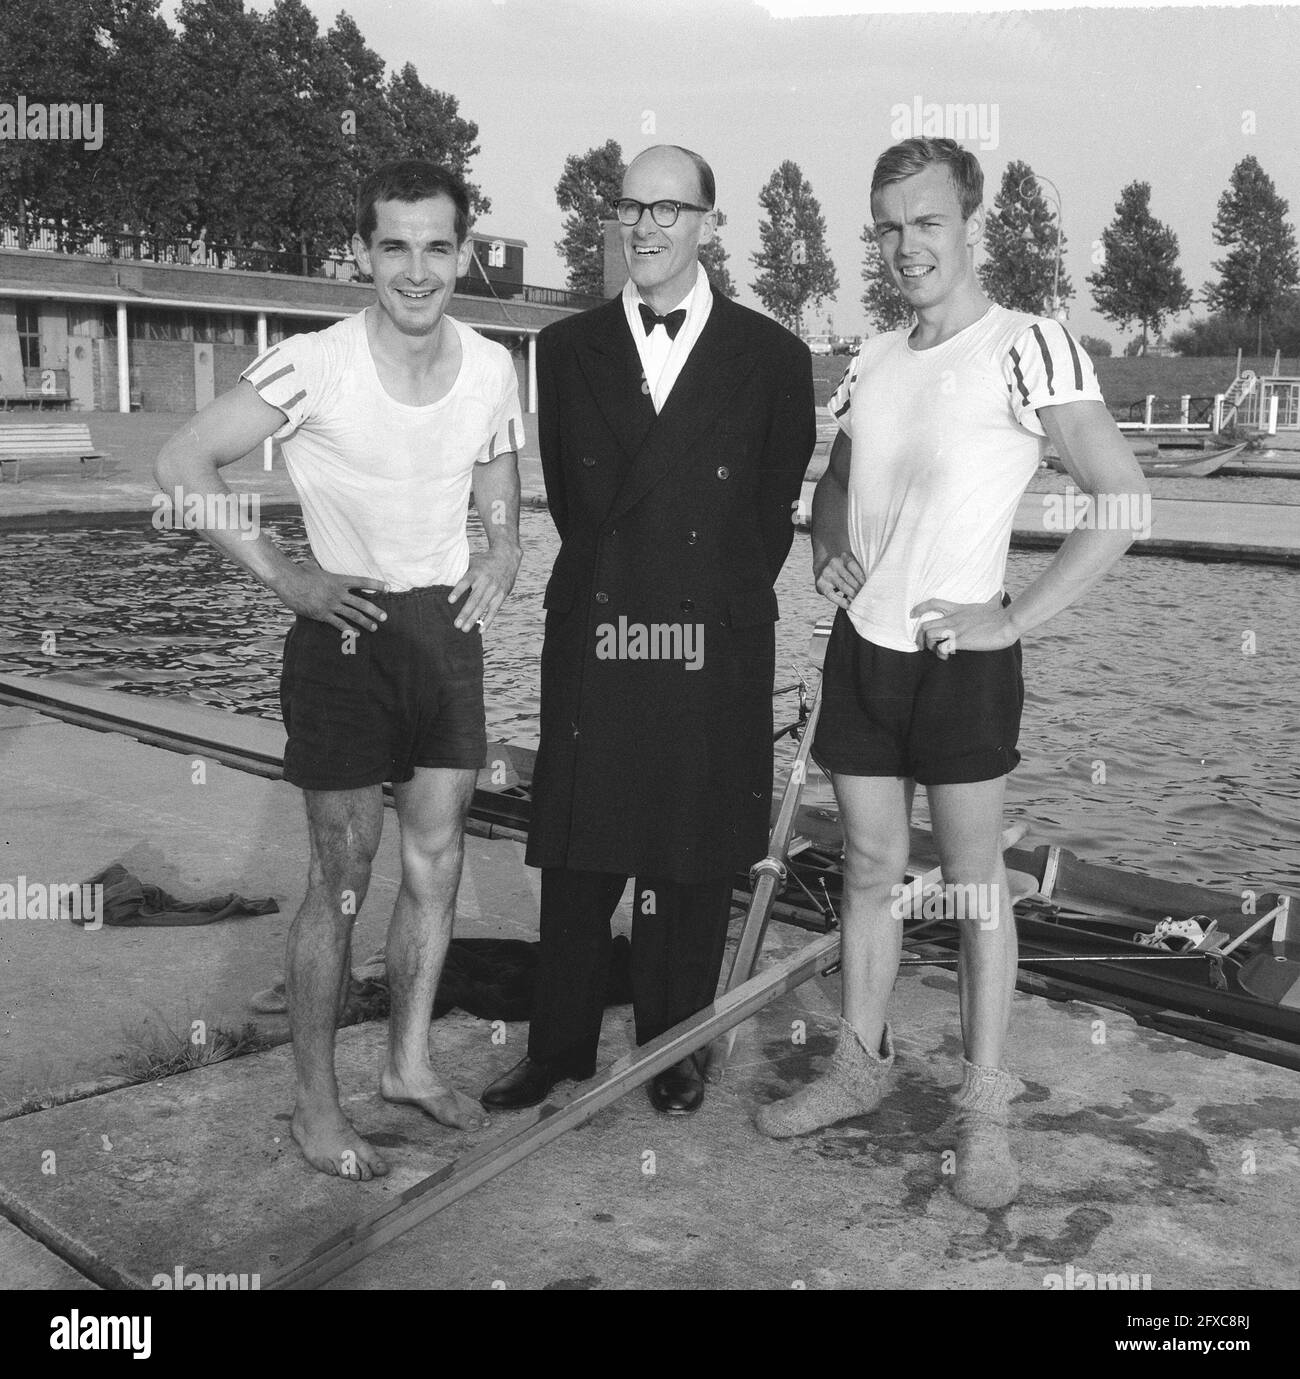 National Championships rowing on the Bosbaan for men's two without coxswain Blaisse and Veenemans, July 24, 1964, CHAMPIONSHIPS, ROUING, coxswains, The Netherlands, 20th century press agency photo, news to remember, documentary, historic photography 1945-1990, visual stories, human history of the Twentieth Century, capturing moments in time Stock Photo